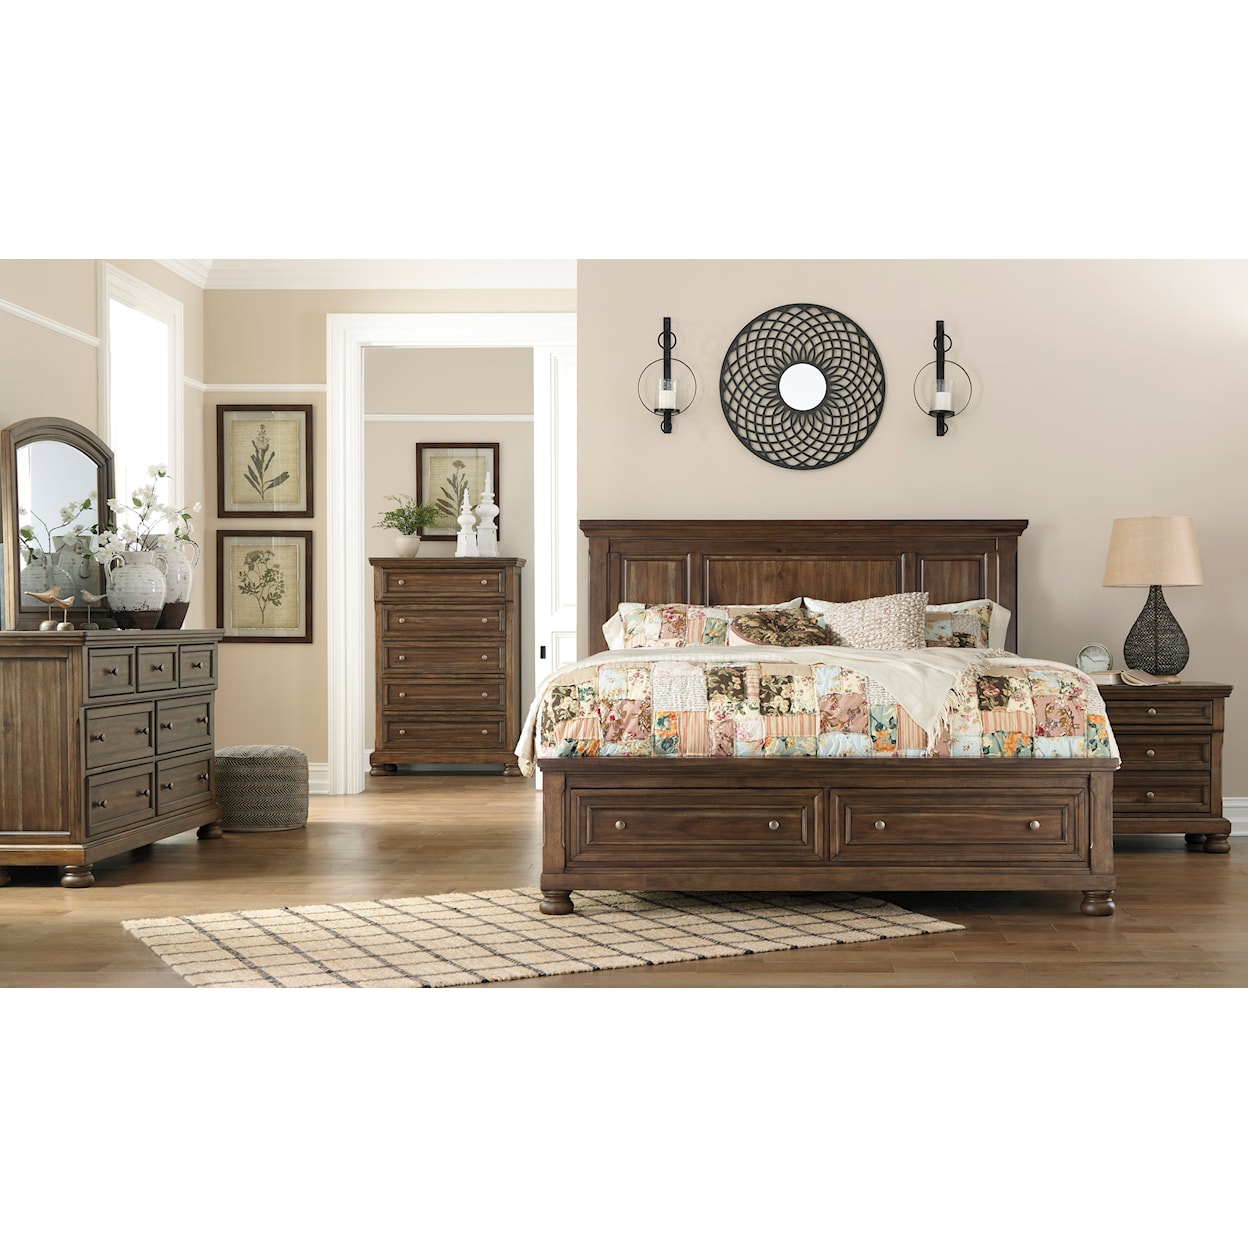 Signature Design by Ashley Flynnter Queen Panel Bed with Storage